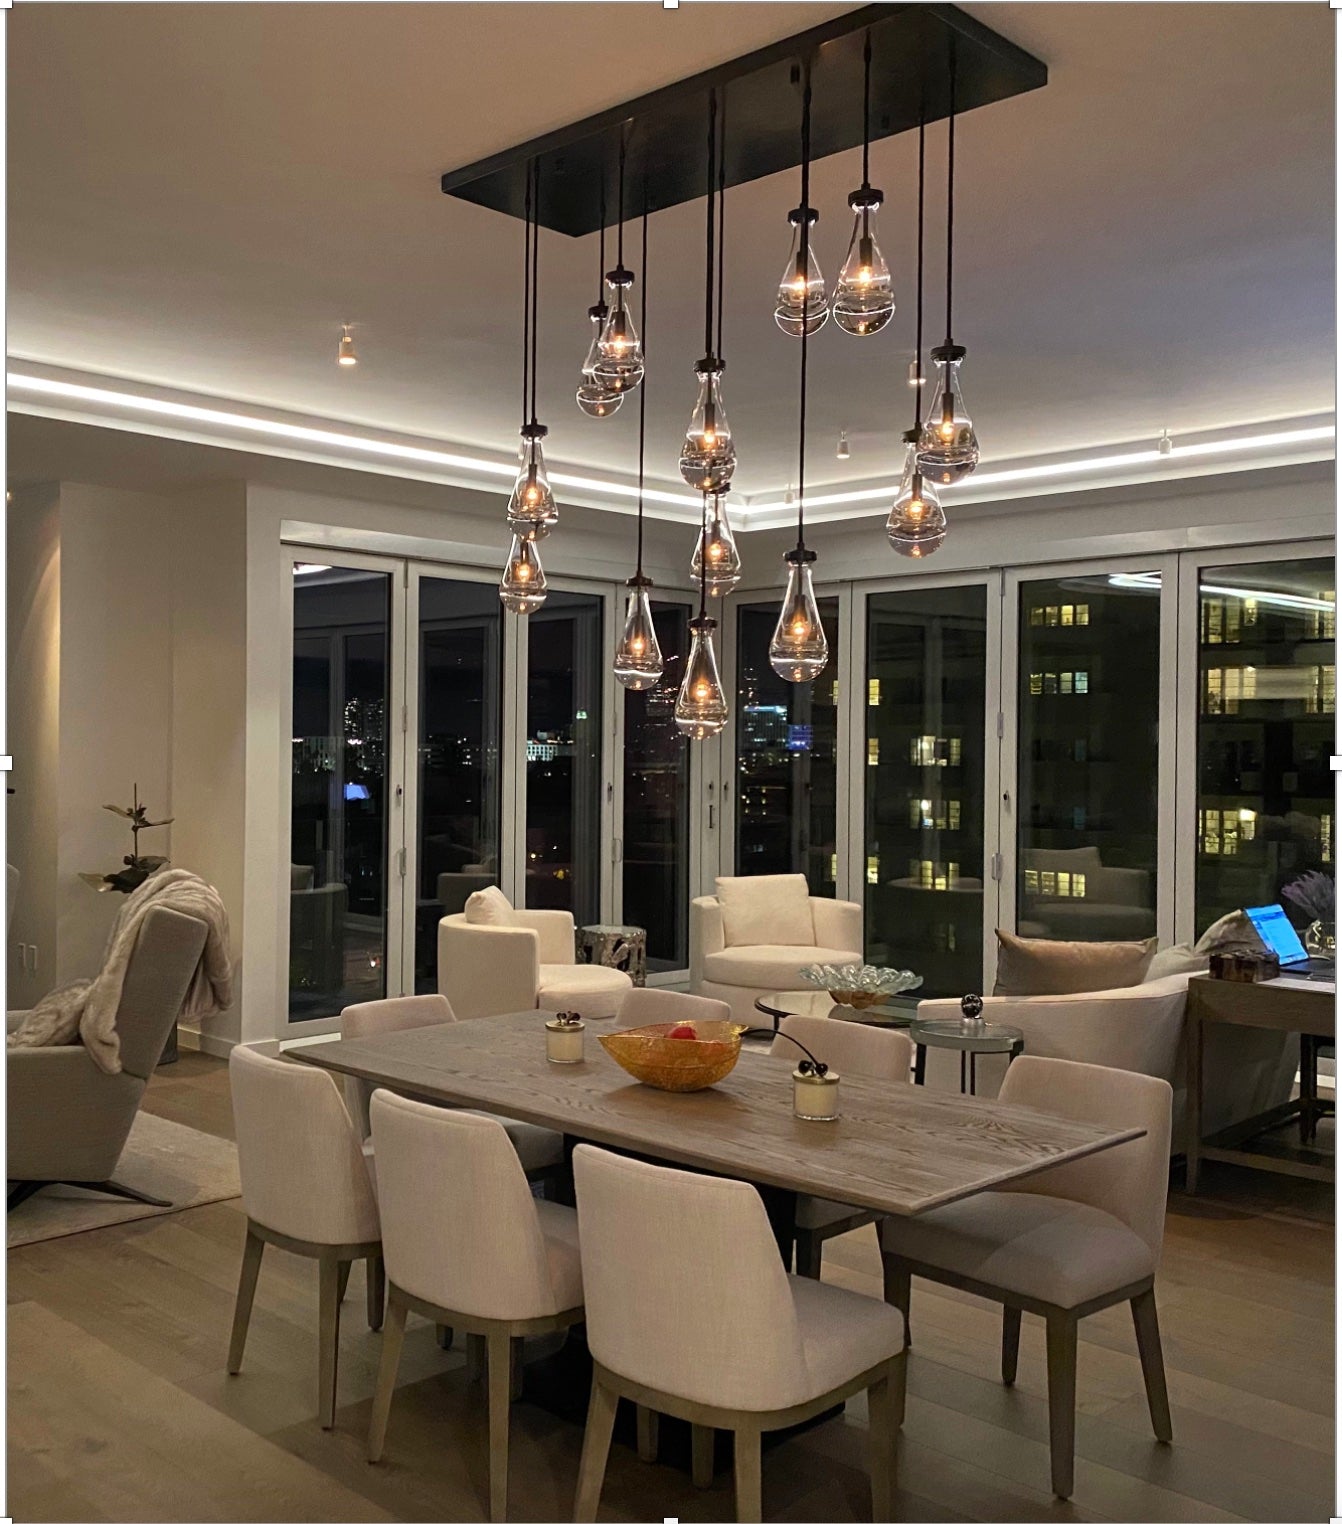 SLS-GLCC15 Gypsum Lighting Crown Cove. Warm and Inviting Glow for Surroundings. Clean and Uniform Light Reflectance. Transform Spaces with Timeless Elegance. 